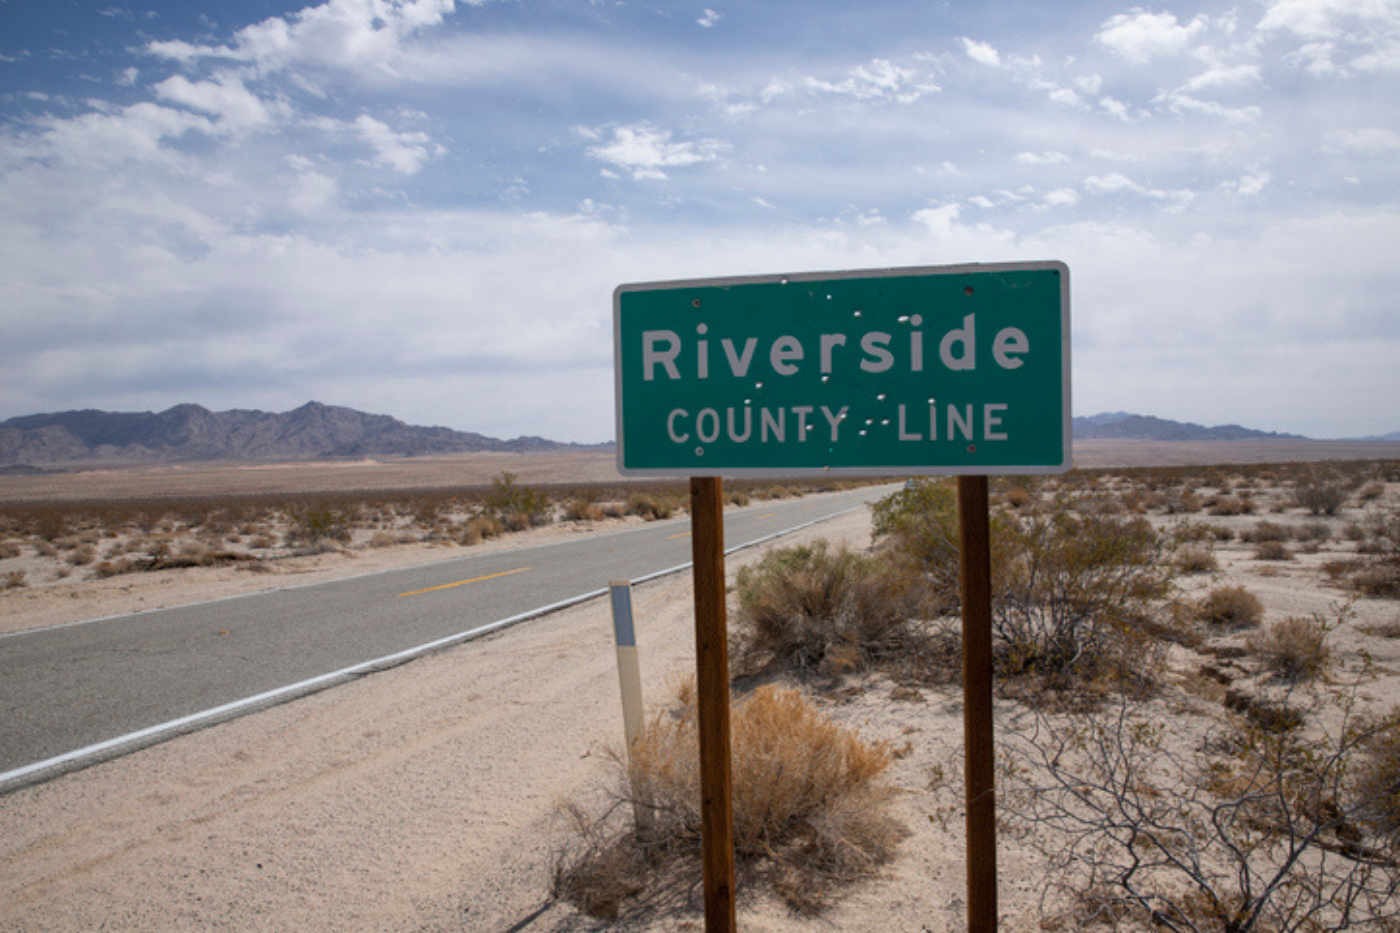 RIVERSIDE COUNTY NEEDS TWO LATINO MAJORITY DISTRICTS TO COMPLY WITH FEDERAL LAW, ACCORDING TO NEW UCLA REPORT